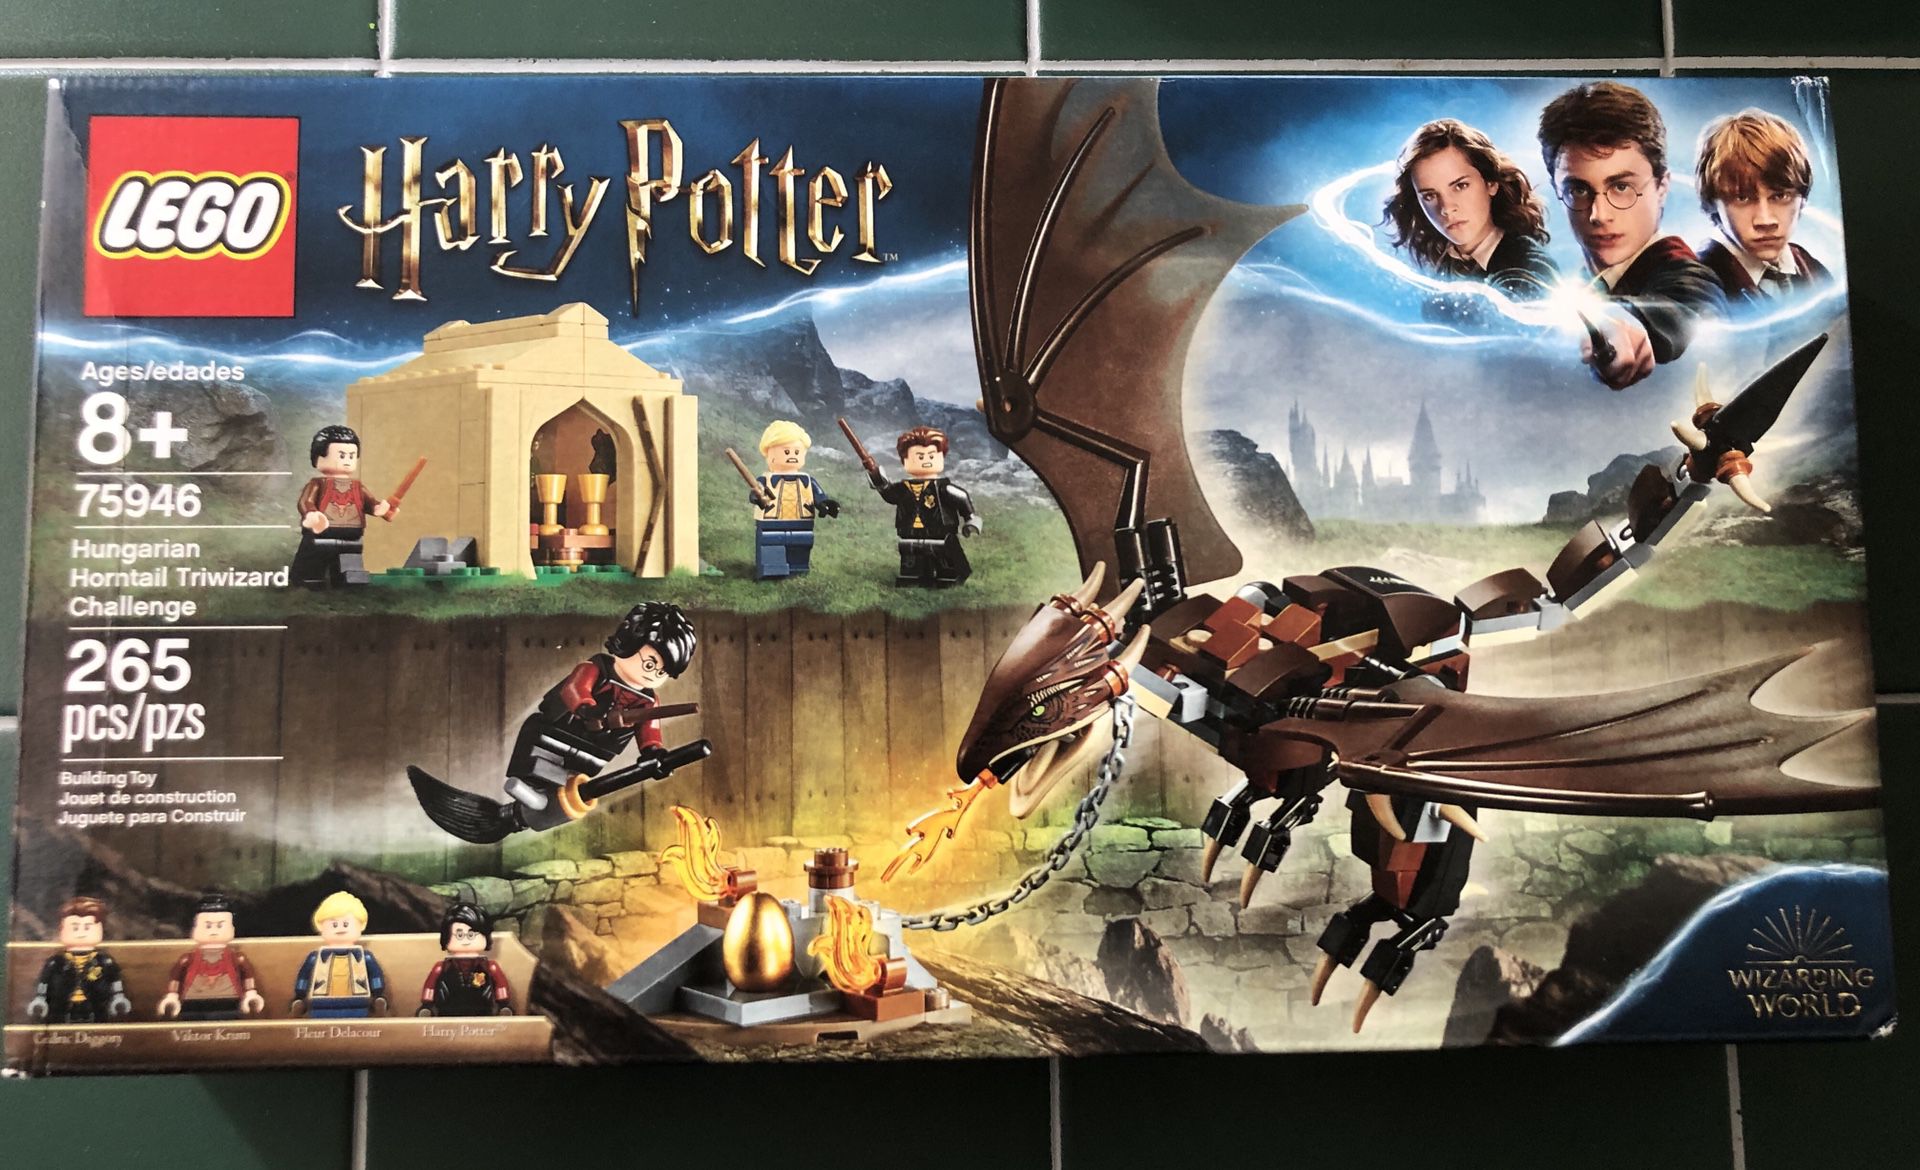 $25 LEGO Harry Potter Hungarian Horntail Triwizard Challenge 75946 (265 Pieces)